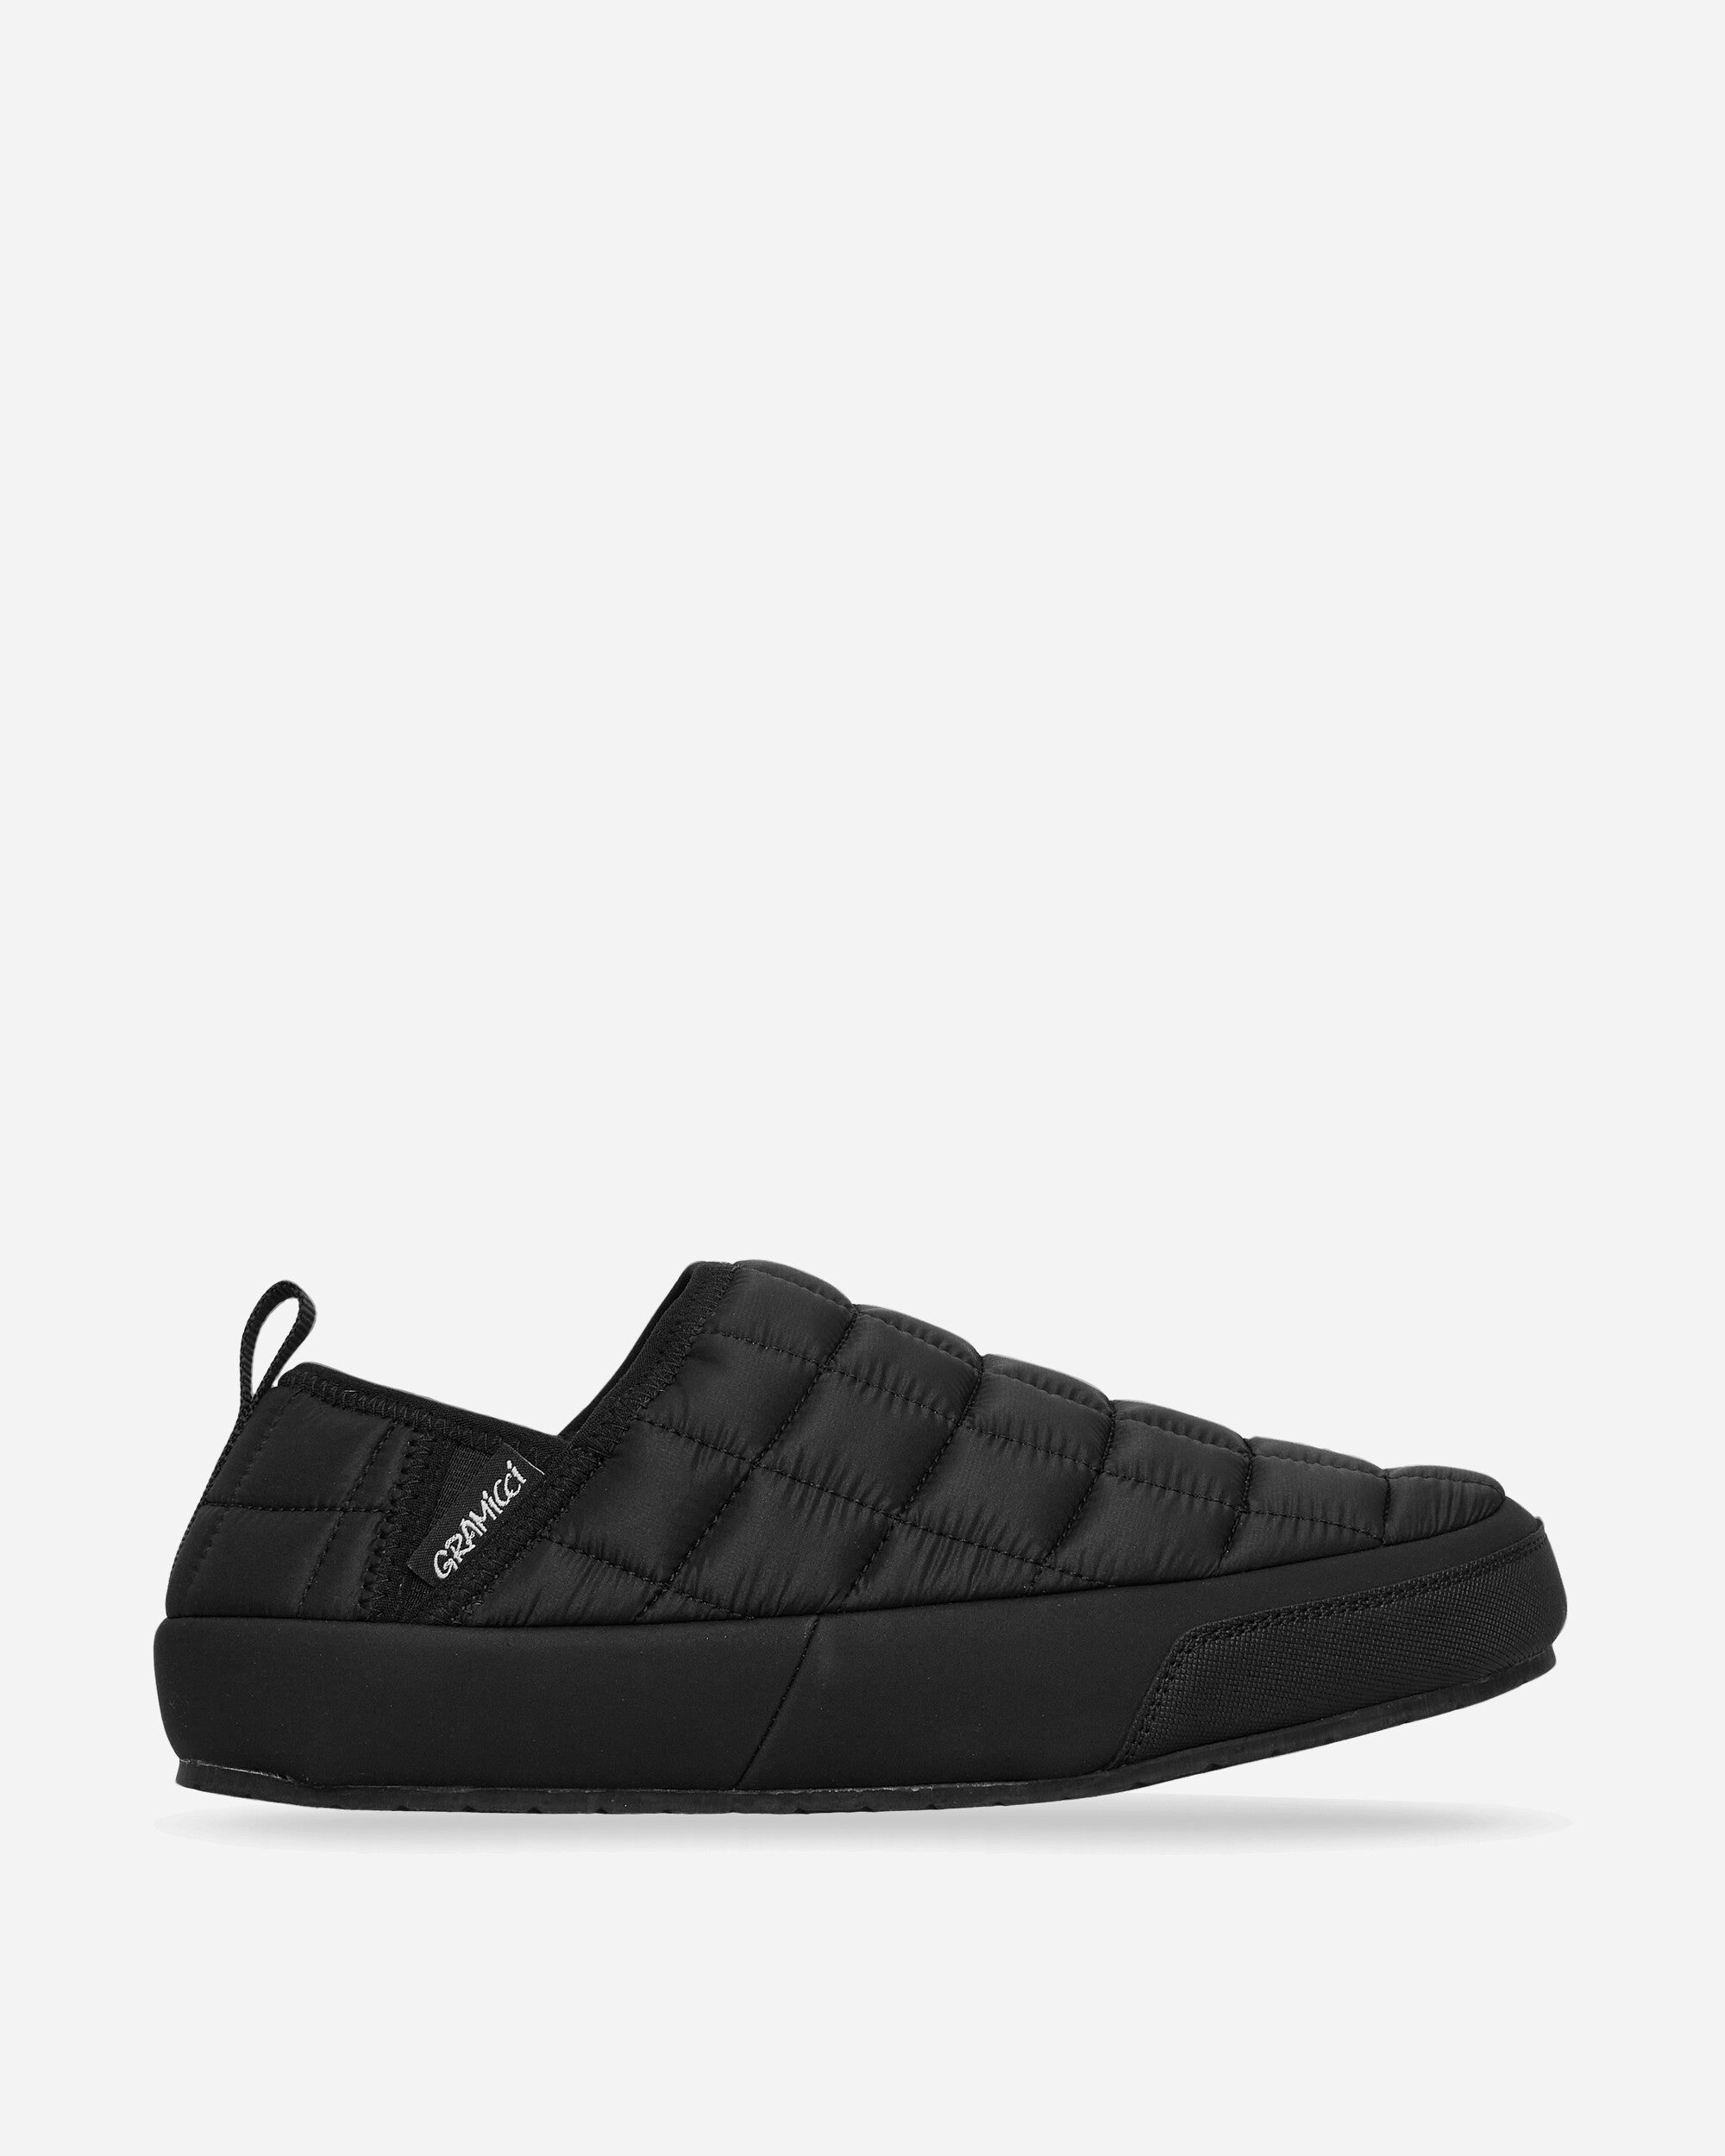 Thermal Moc Slippers Black